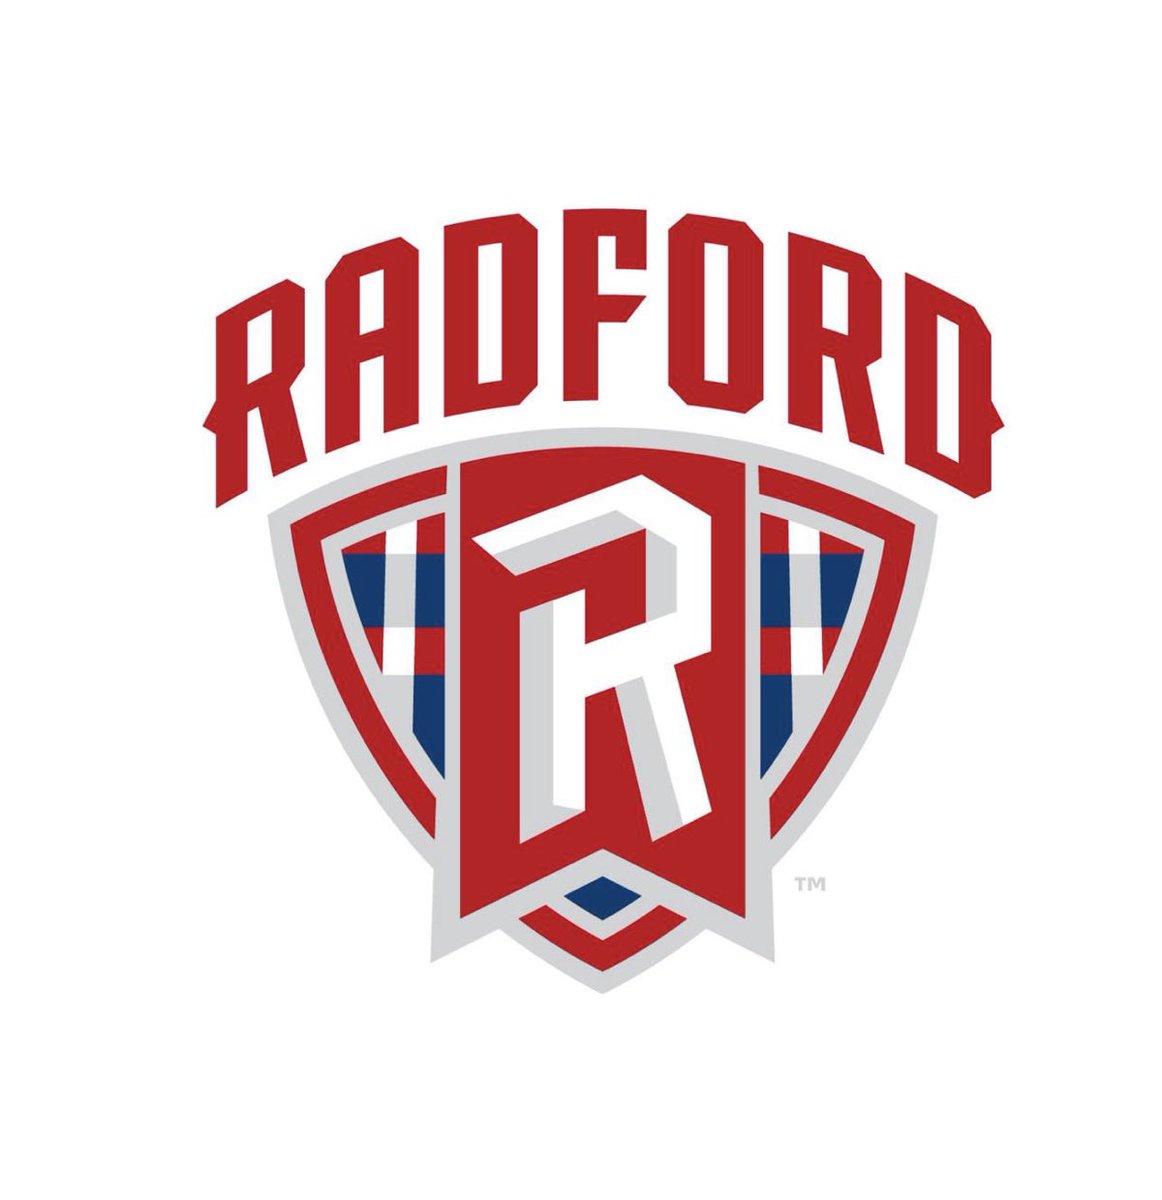 Extremely blessed to receive my first Division 1 offer from Radford University! @CoachJonesMPB @HoopStateAnt @RadfordMBB @MillbrookMBB #AGTG